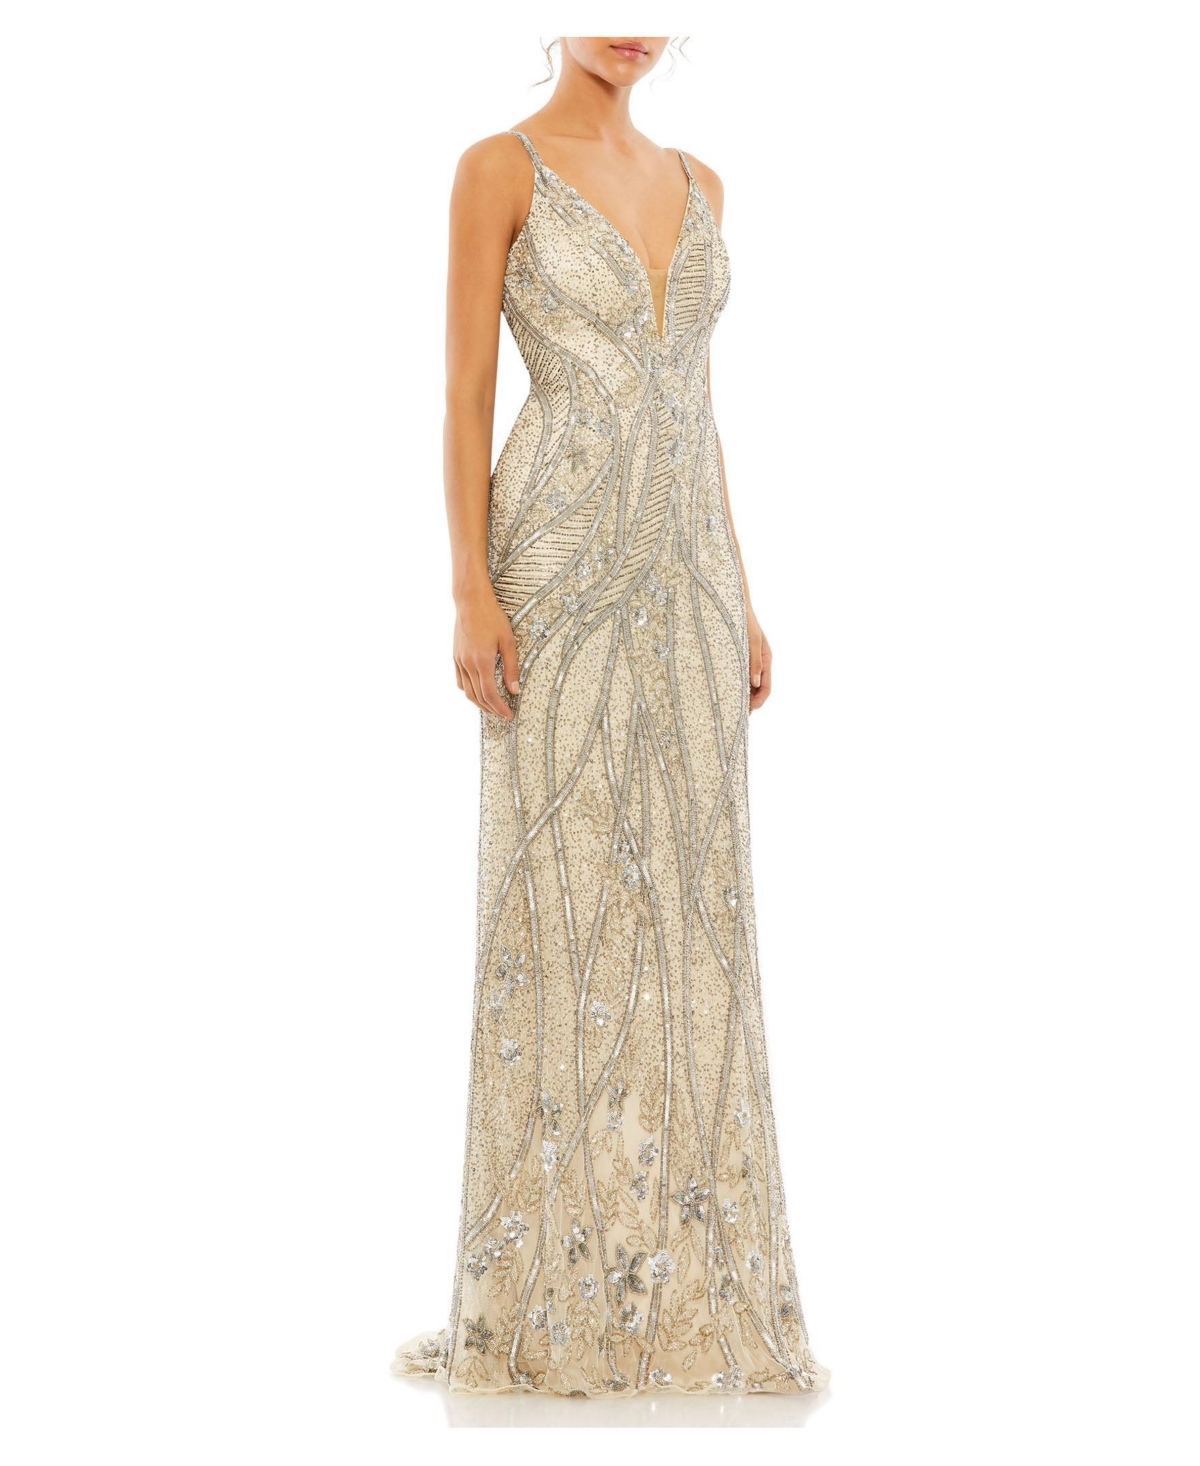 MAC DUGGAL WOMEN'S EMBELLISHED SLEEVELESS PLUNGE NECK LOW BACK GOWN